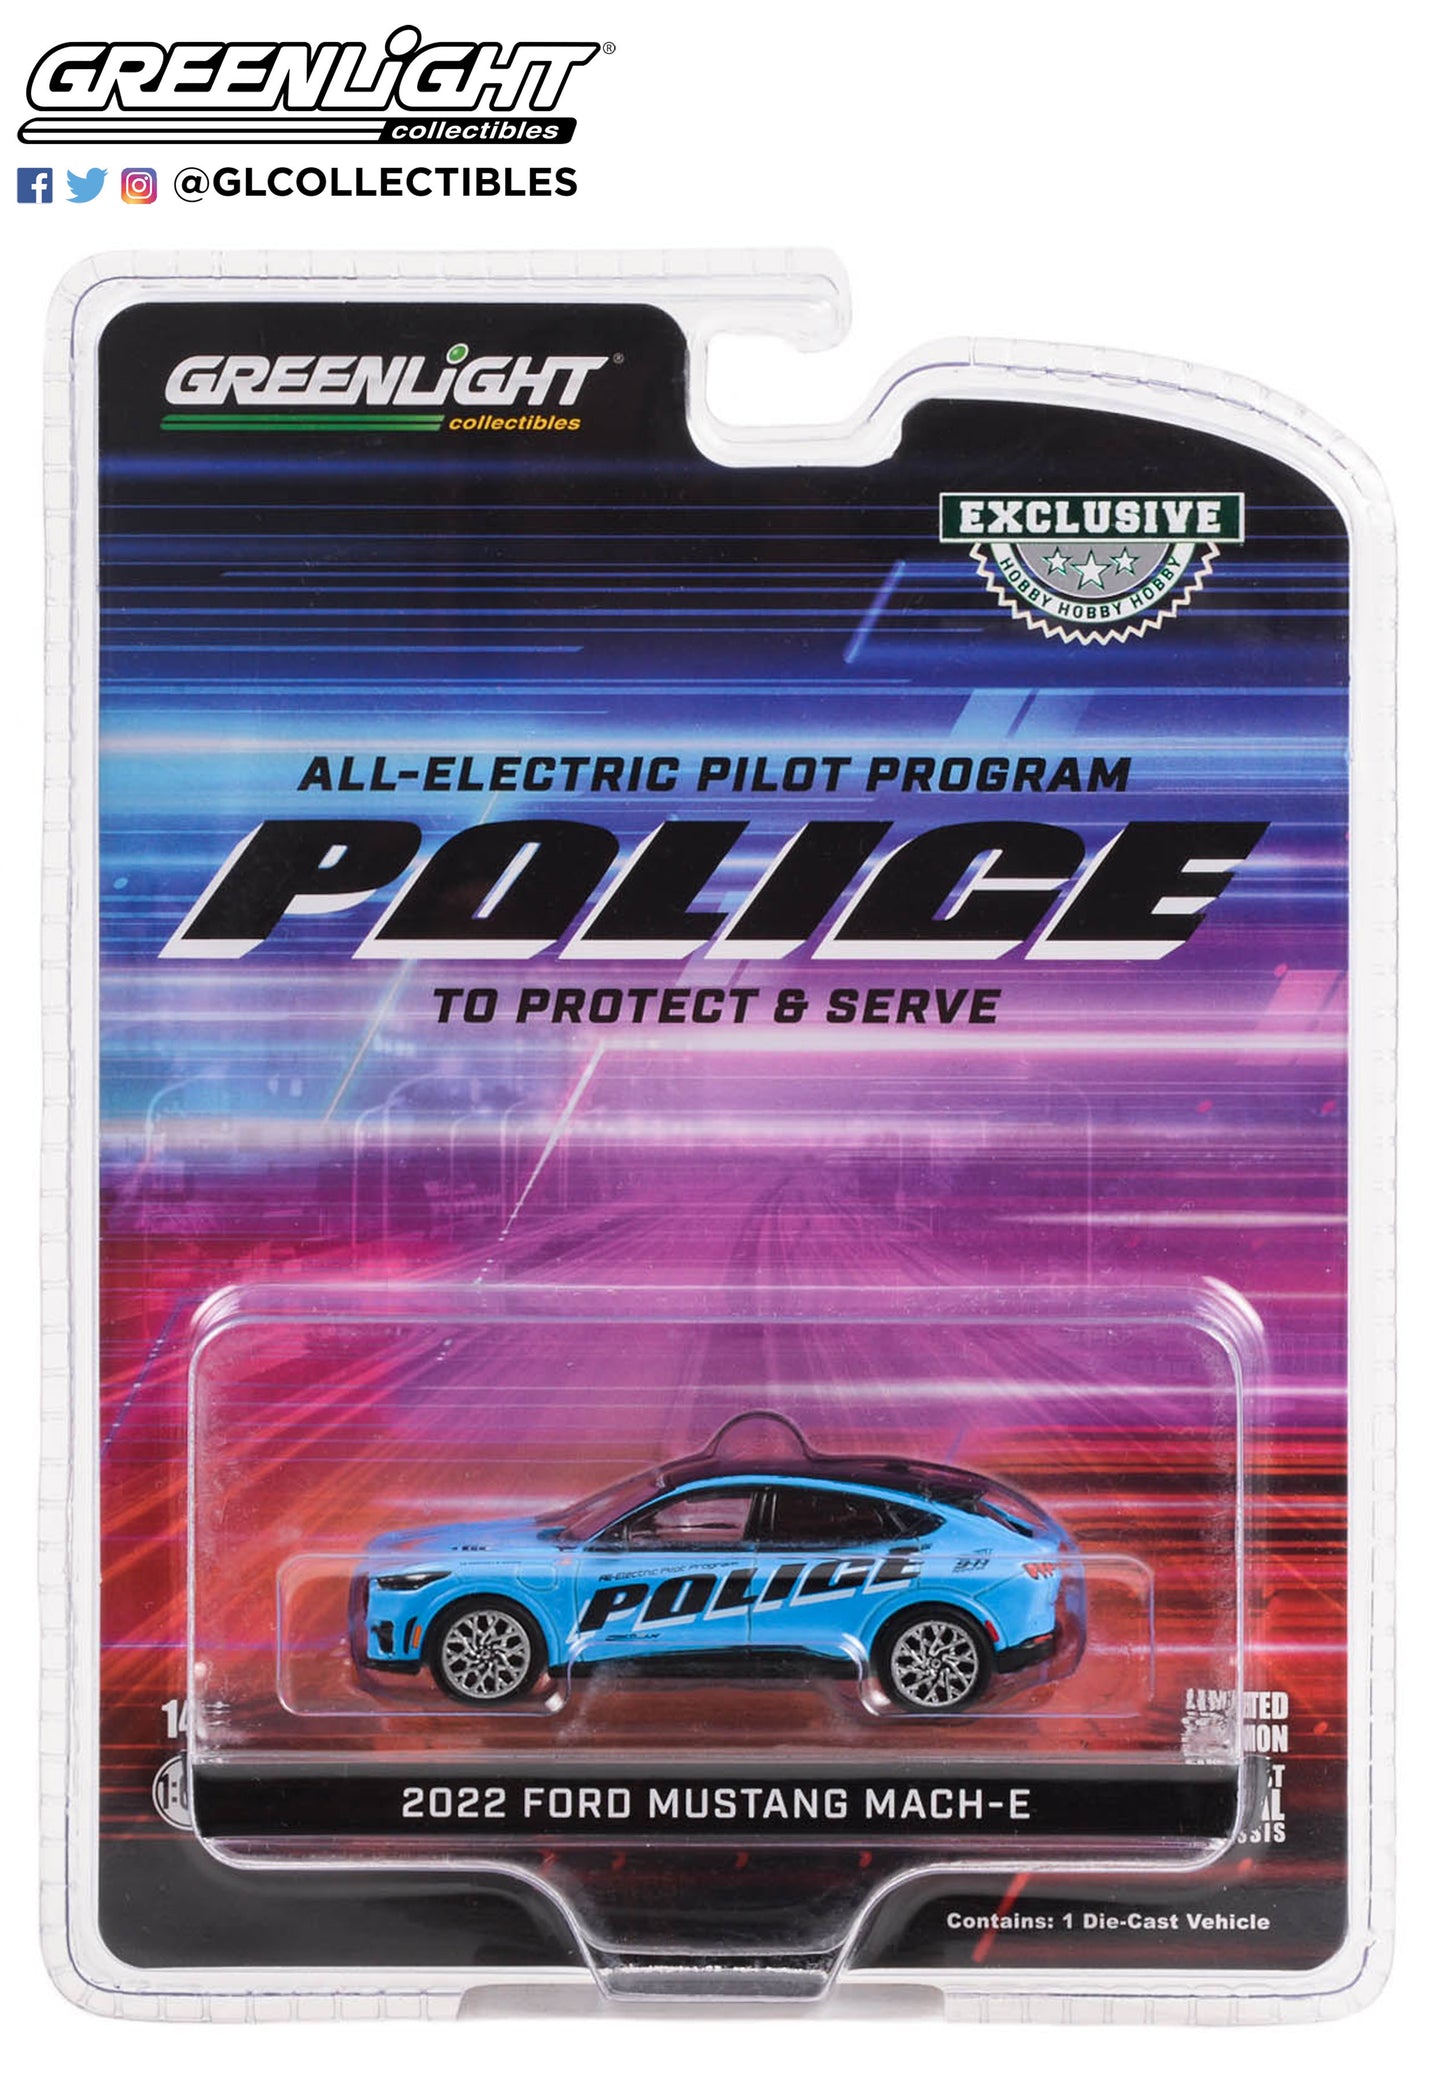 GreenLight 1:64 2022 Ford Mustang Mach-E Police GT Performance Edition - All-Electric Pilot Program Pilot Vehicle 30429